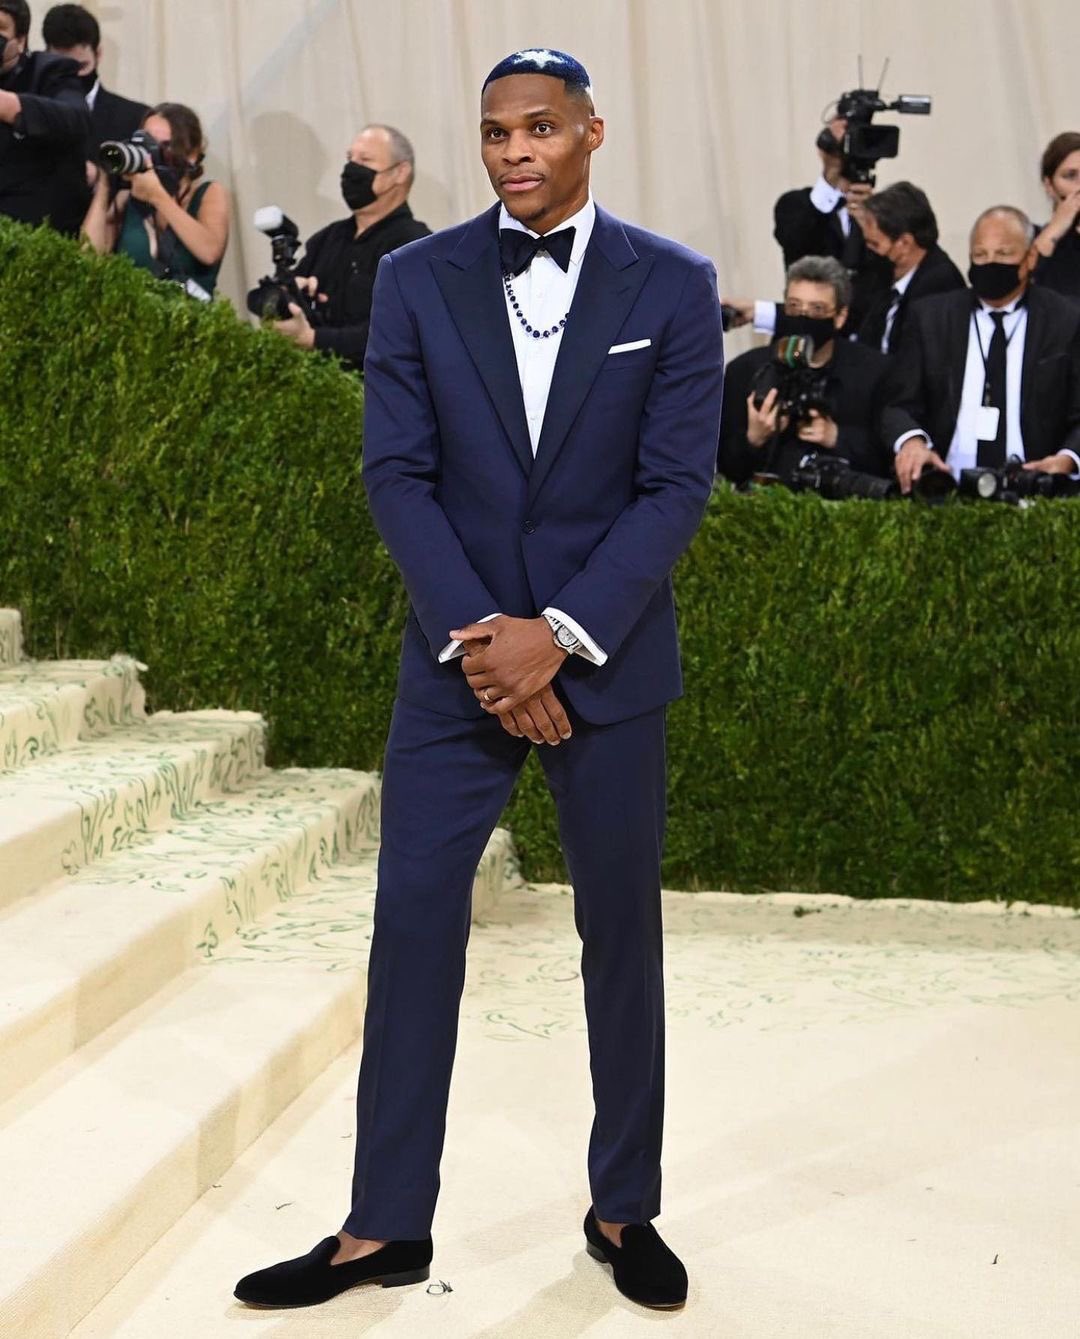 Russell Westbrook Dyed His Hair to Match His Met Gala Tux